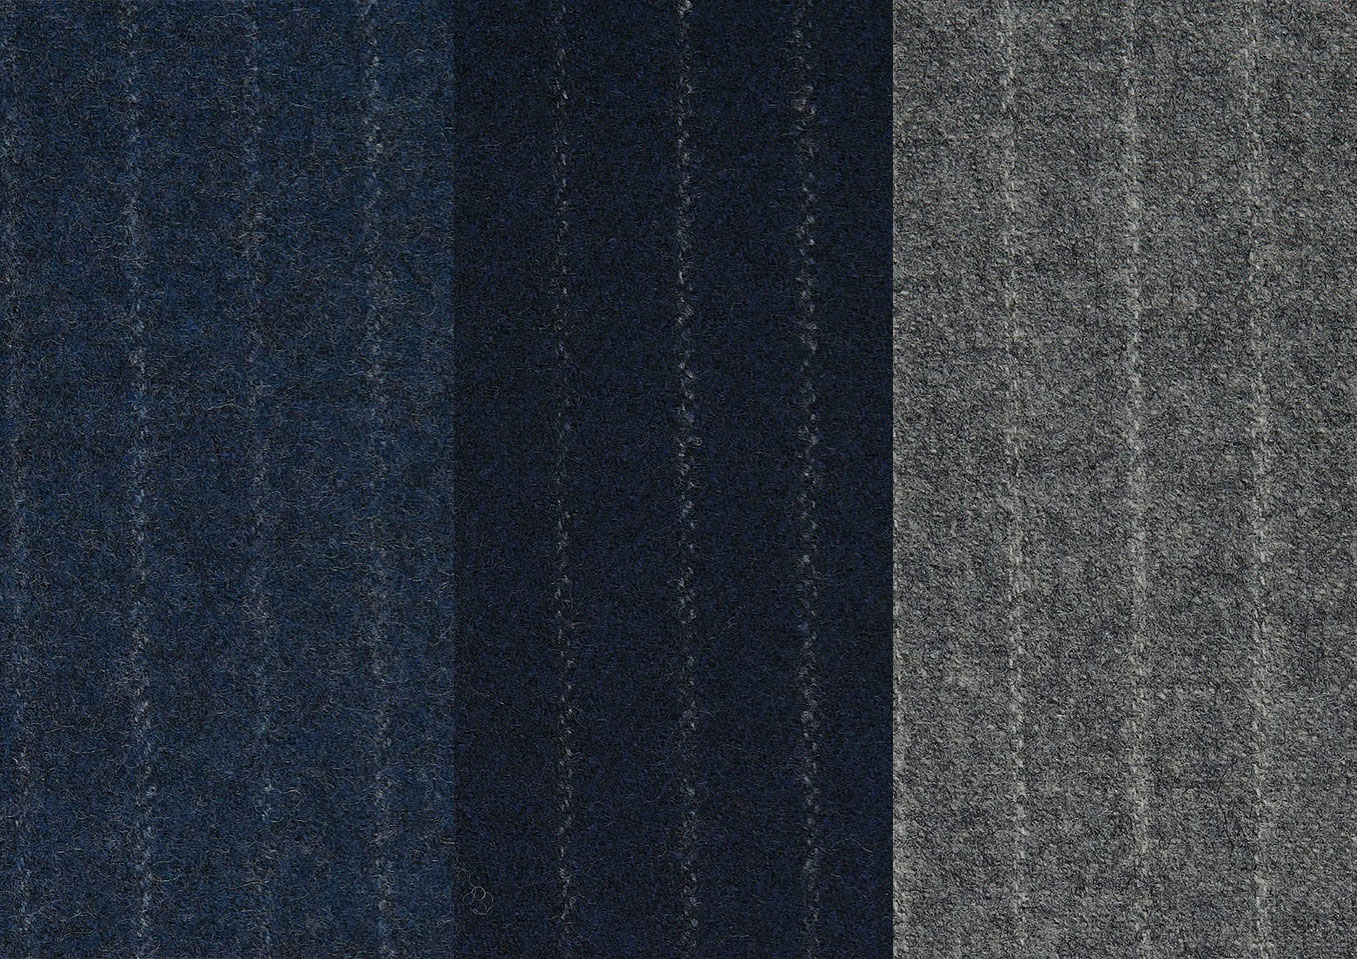 A closer look at our most luxurious fabrics